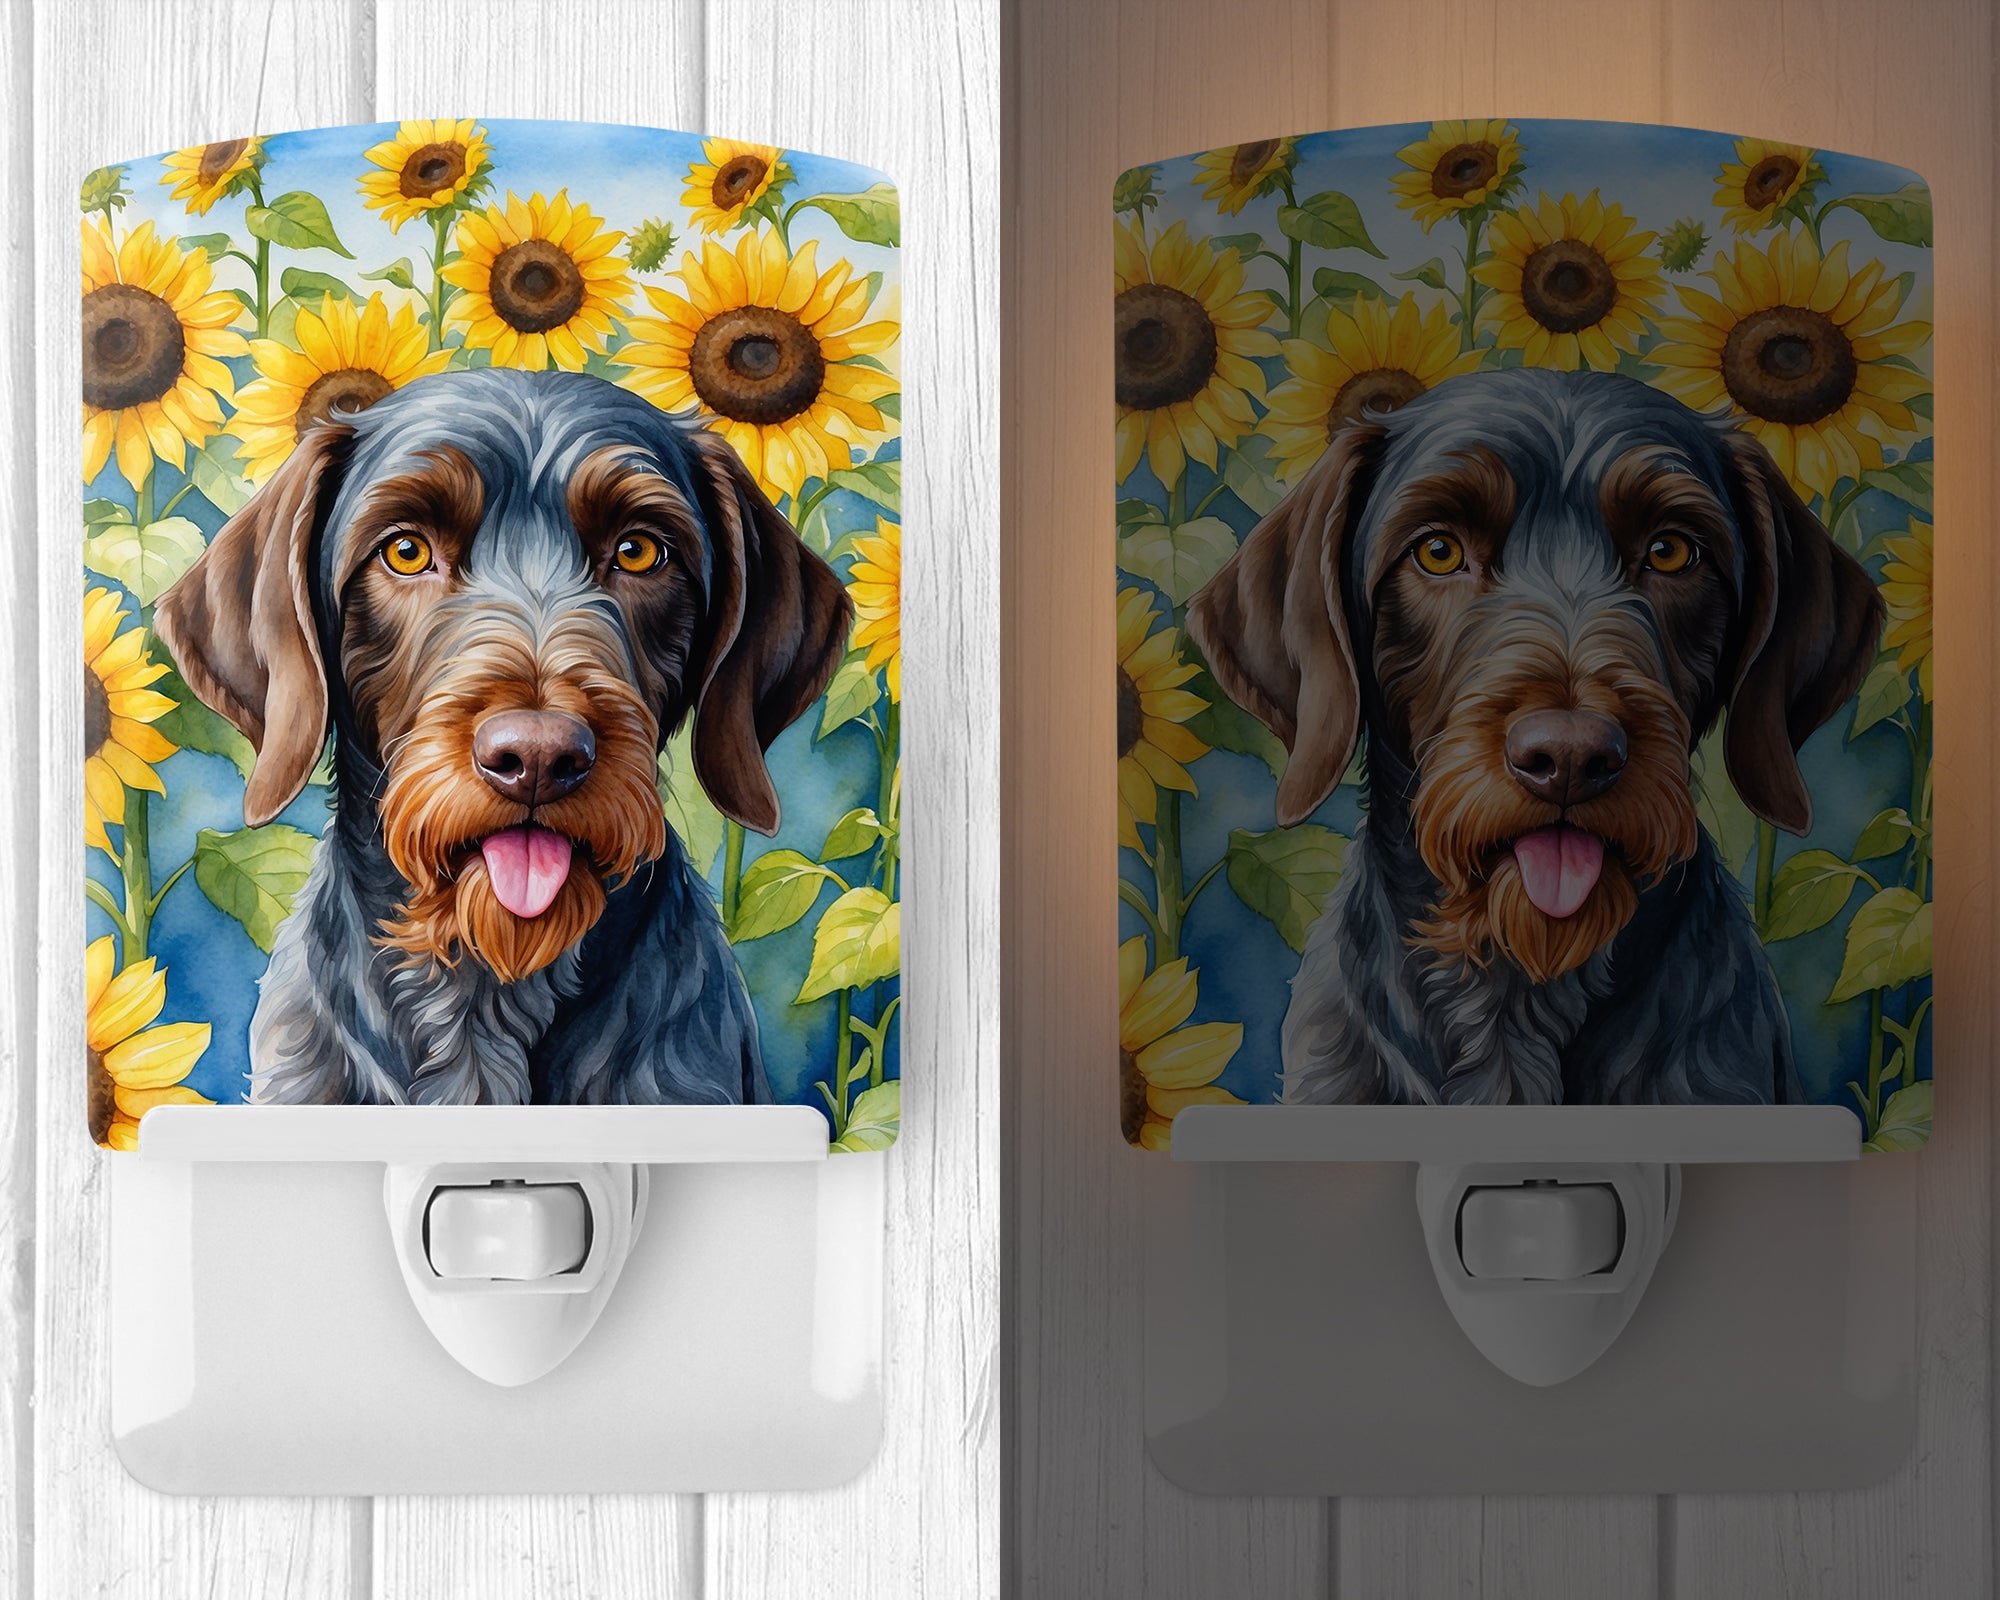 Buy this German Wirehaired Pointer in Sunflowers Ceramic Night Light